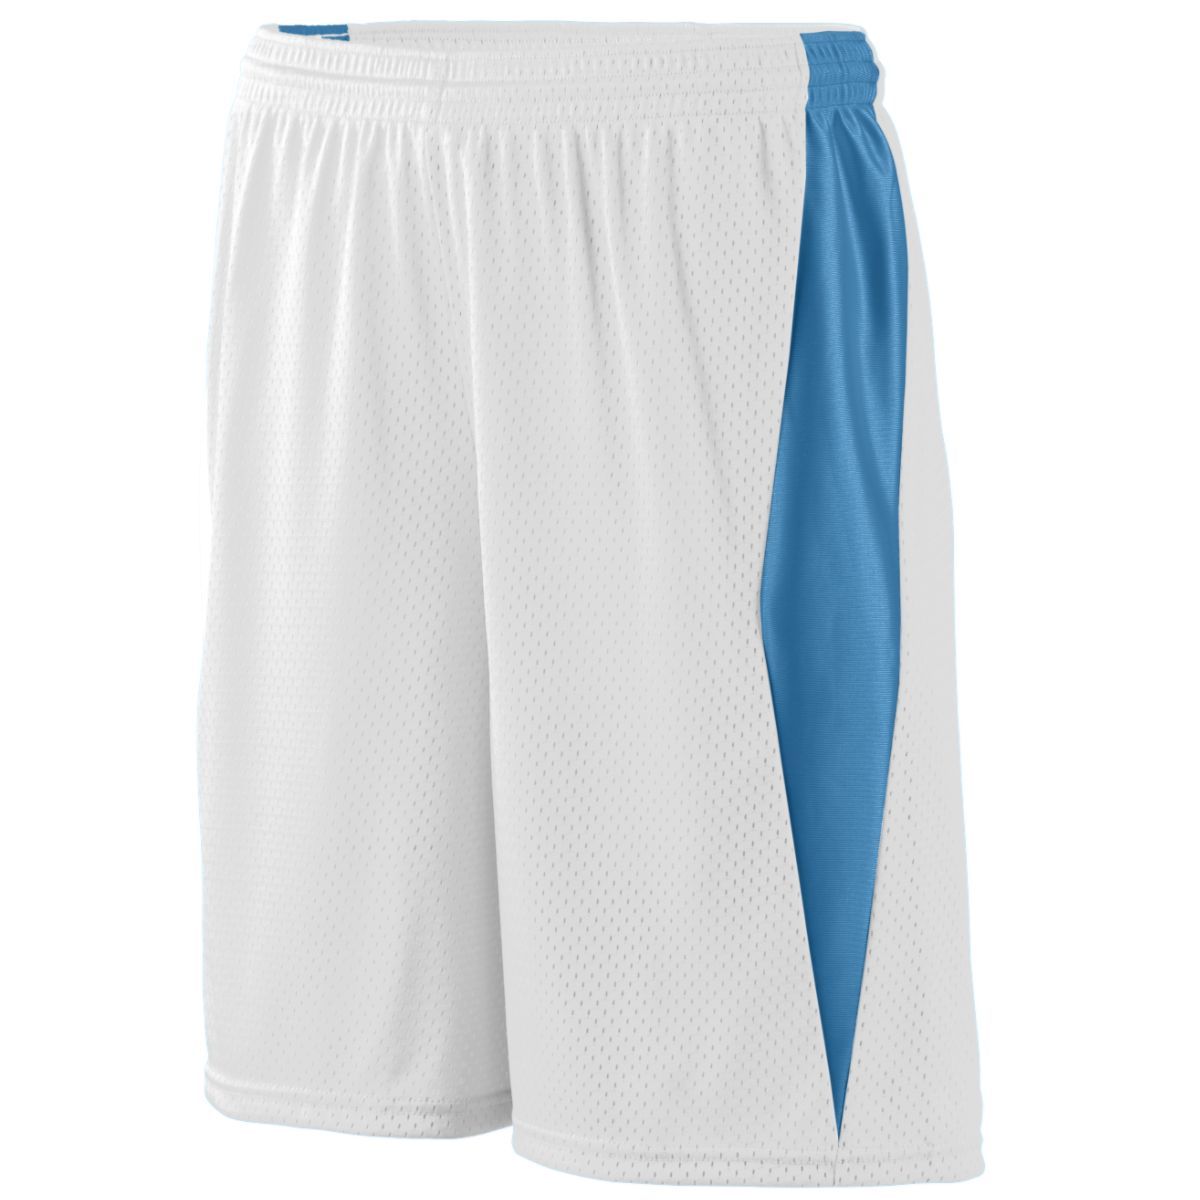 Augusta Sportswear Top Score Shorts in White/Columbia Blue  -Part of the Adult, Adult-Shorts, Augusta-Products, Lacrosse, All-Sports, All-Sports-1 product lines at KanaleyCreations.com